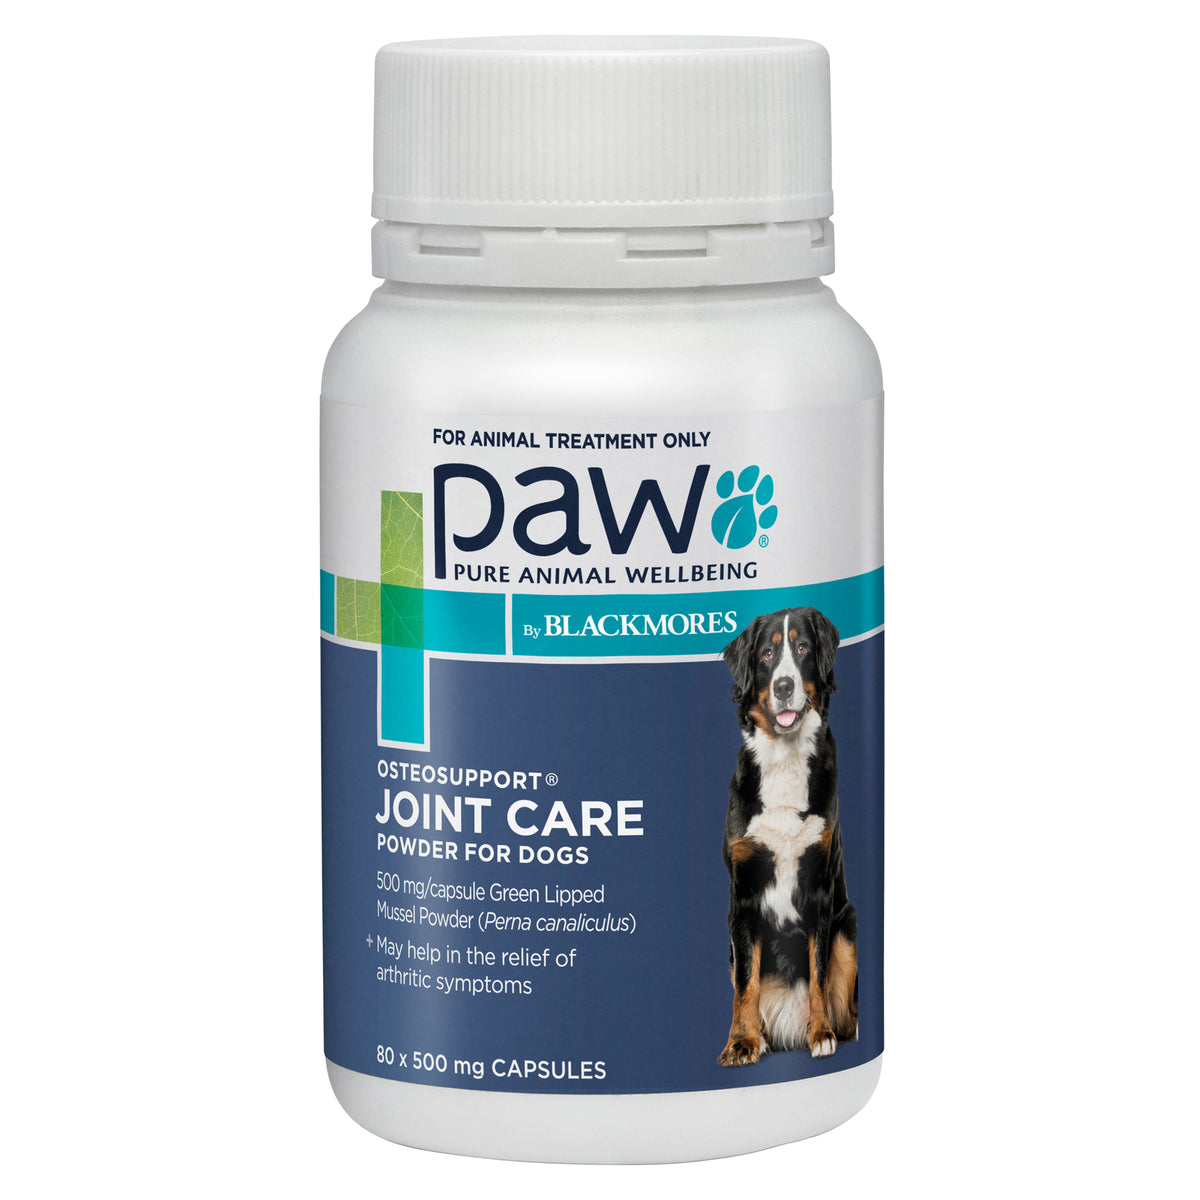 PAW OsteoSupport Joint Care Powder for Dogs